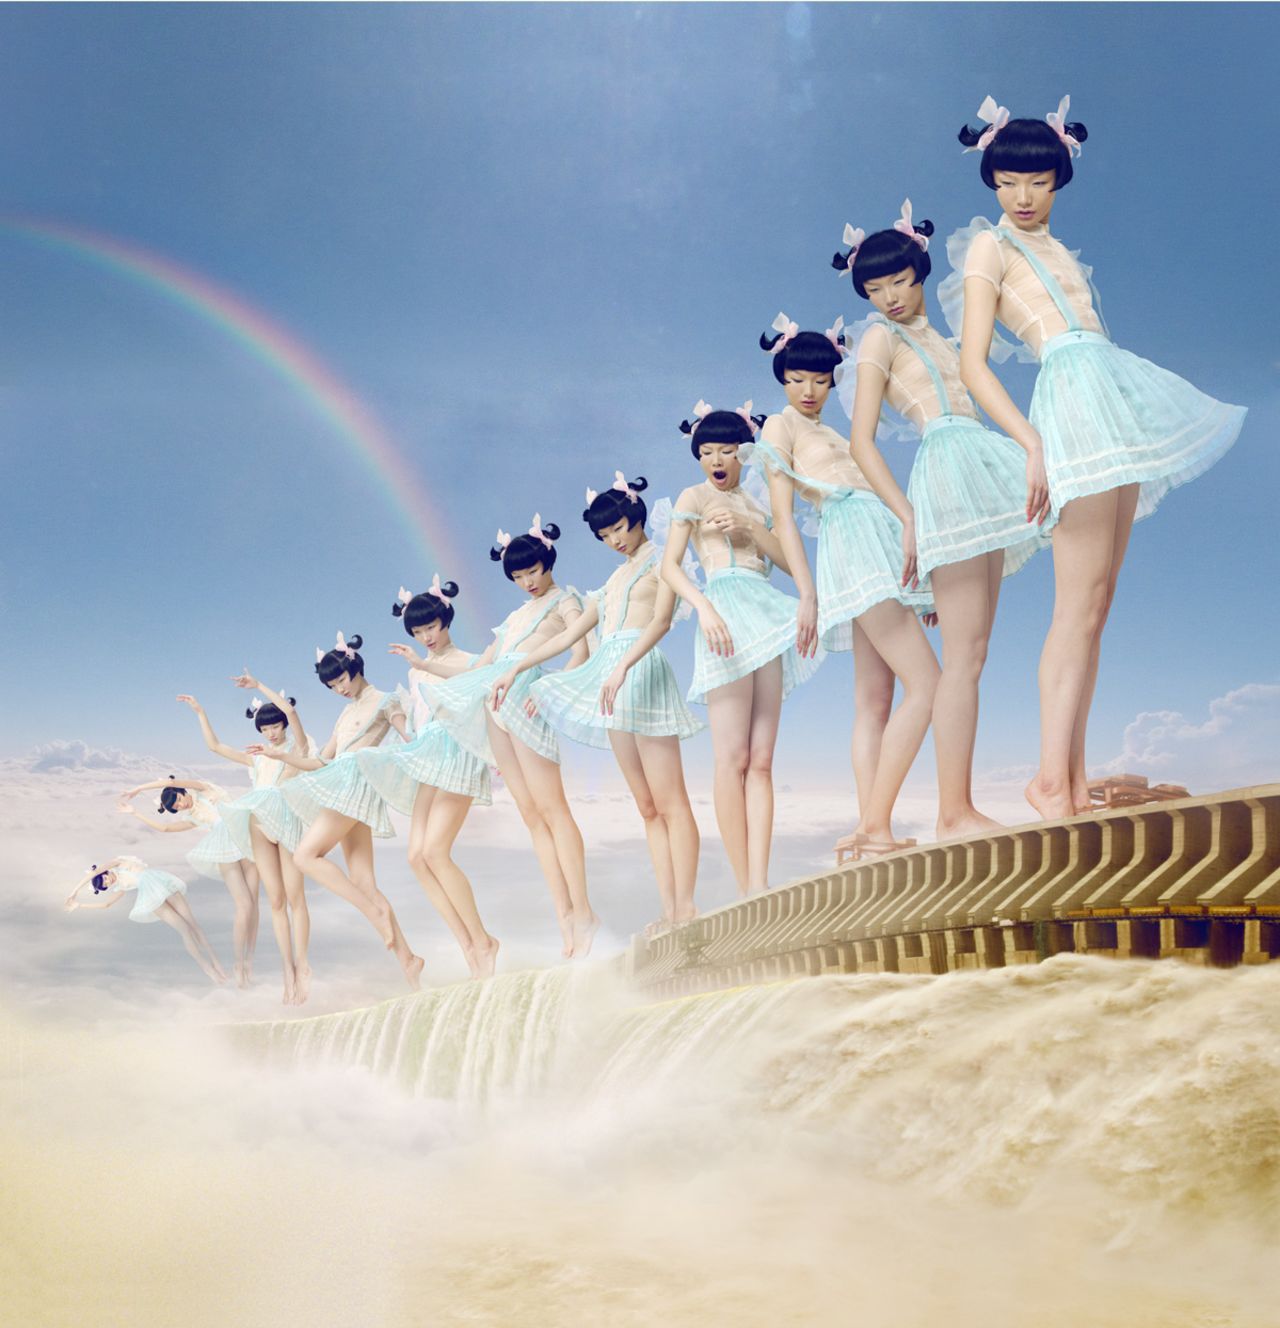 In earlier works, like this photo, "Young Pioneer and the Three Gorges" from 2008, Chen Man heavily uses post-production techniques to create surreal images. 